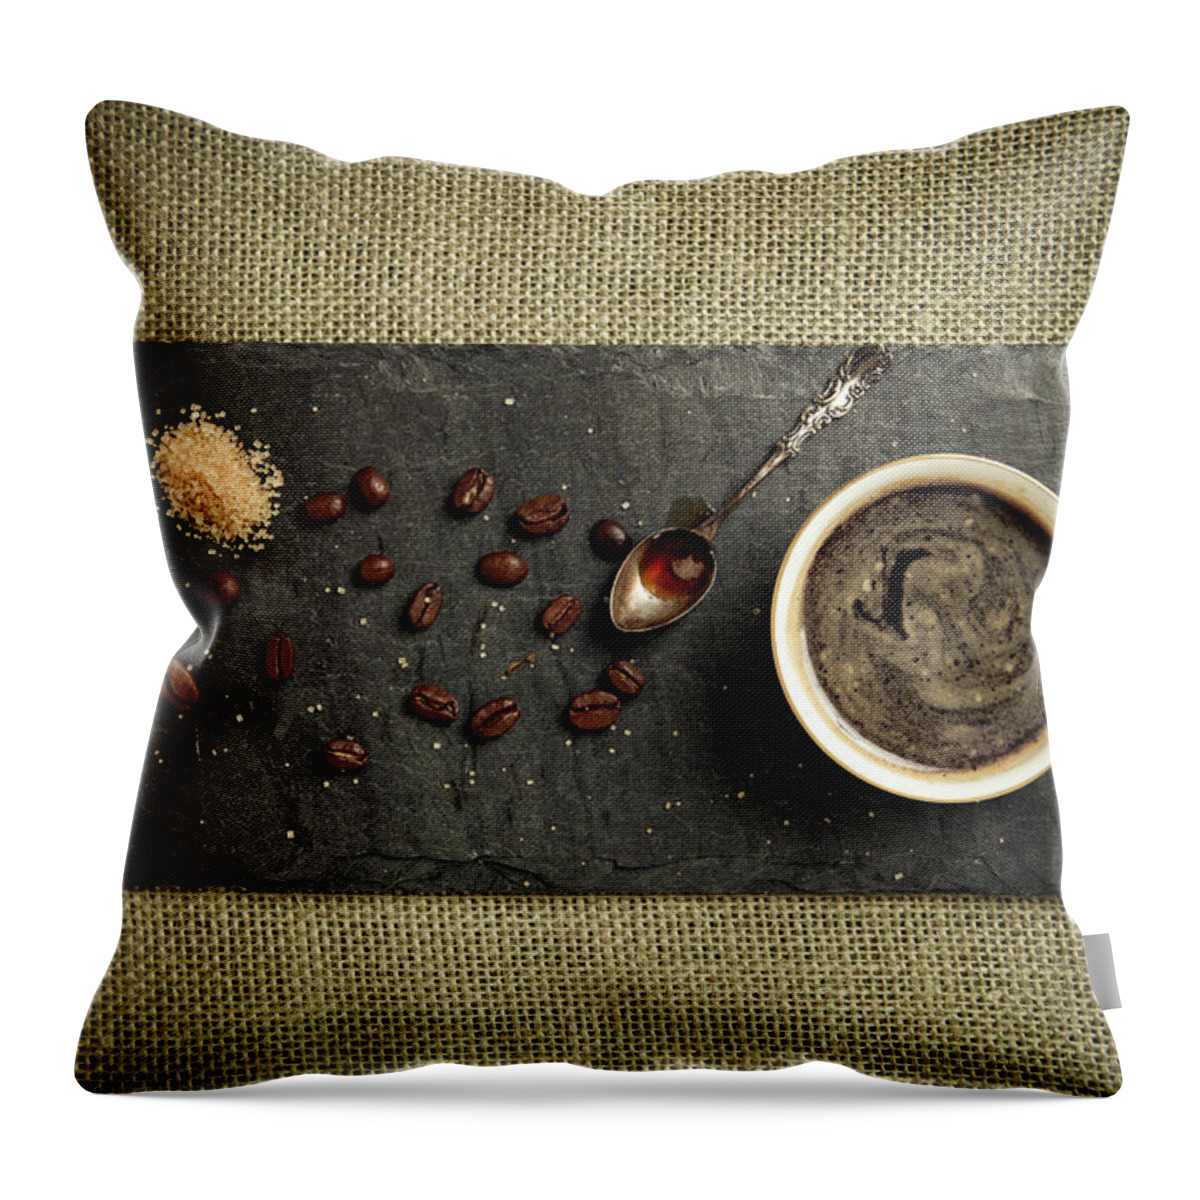 Breakfast Throw Pillow featuring the photograph Black Espresso And Coffee Beans by Jorgegonzalez